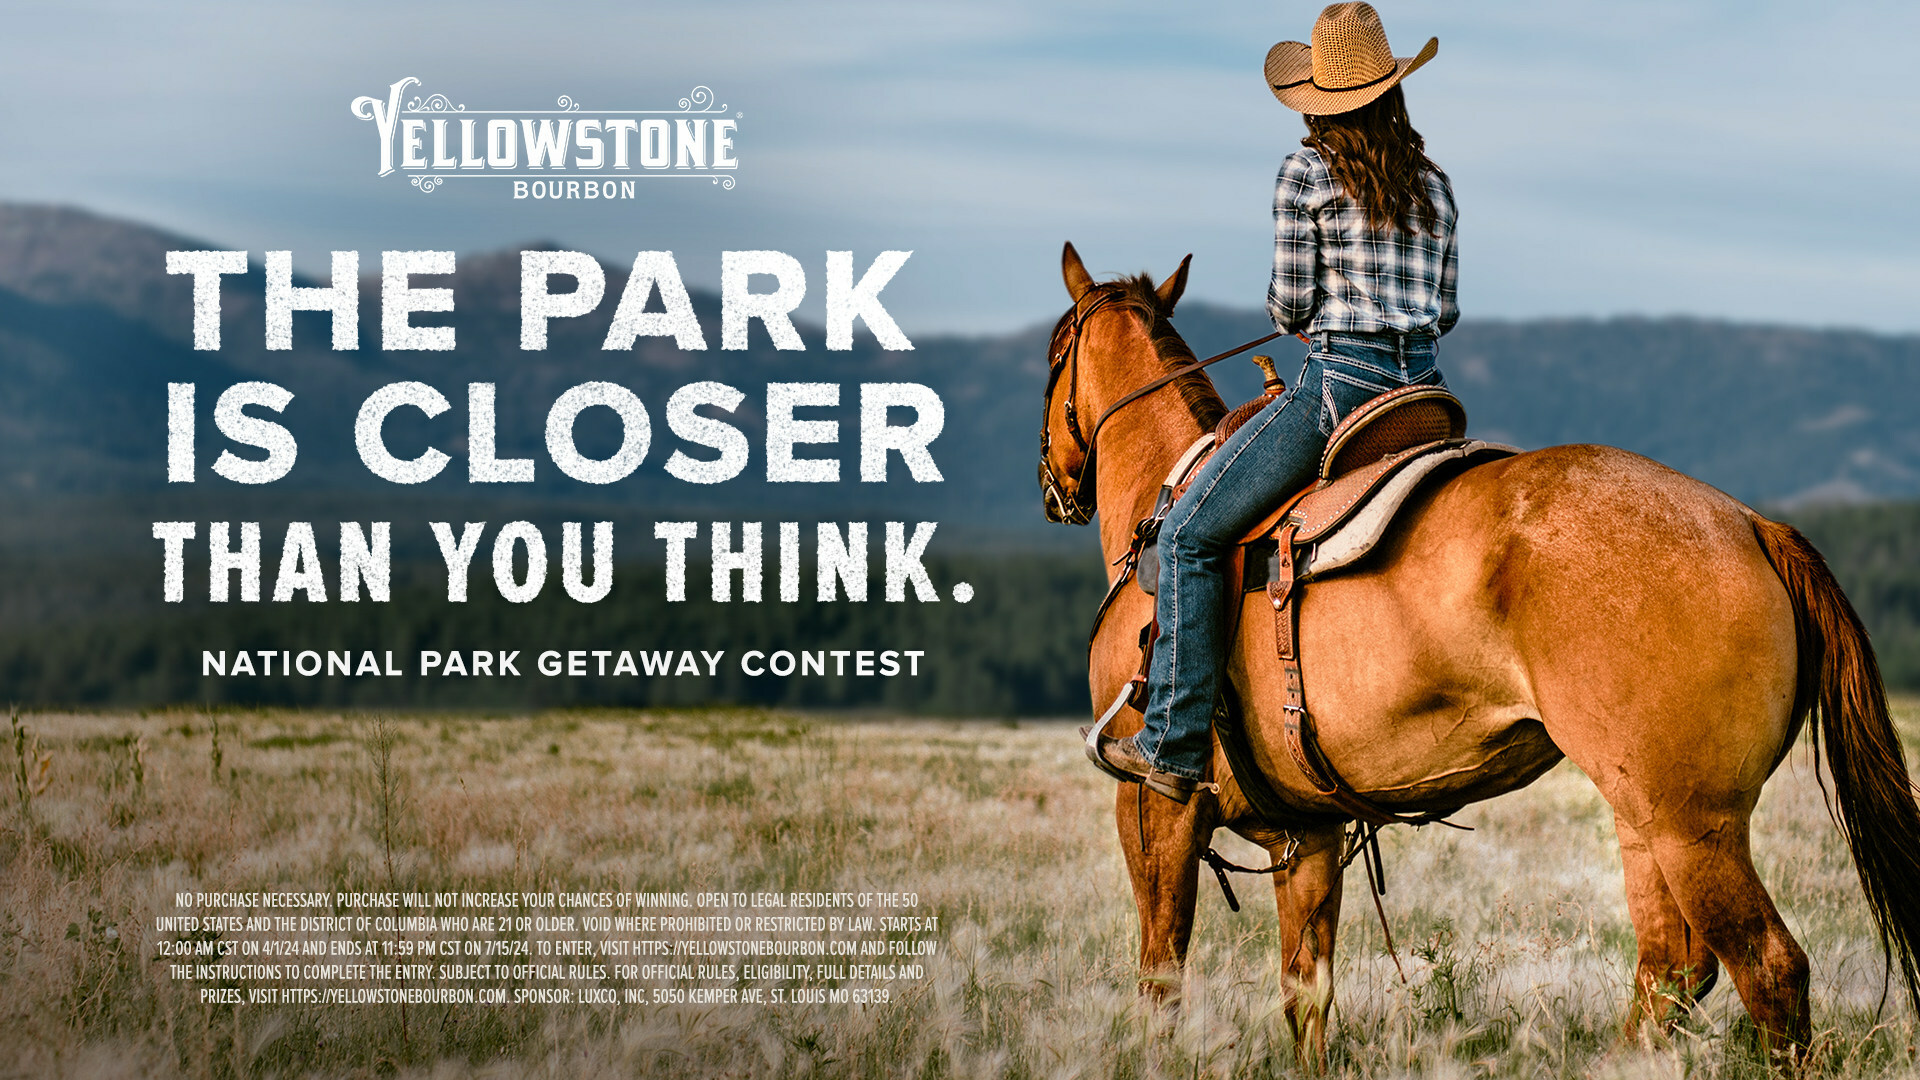 The Ultimate National Park Getaway Contest Launched by Yellowstone Bourbon